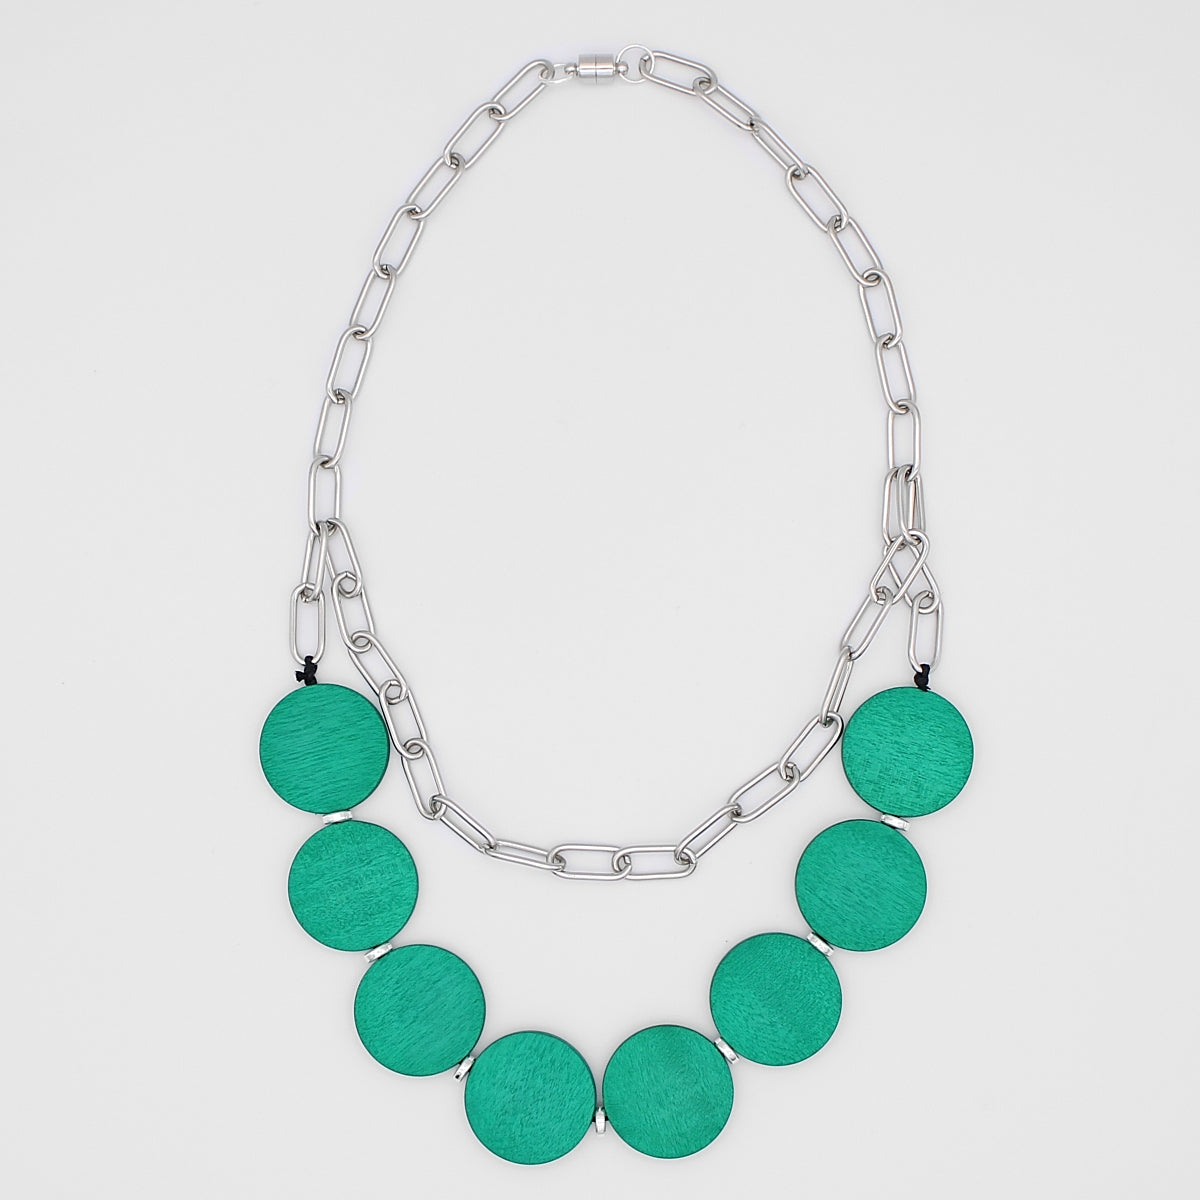 Teal Double Layer Chain Link Necklace